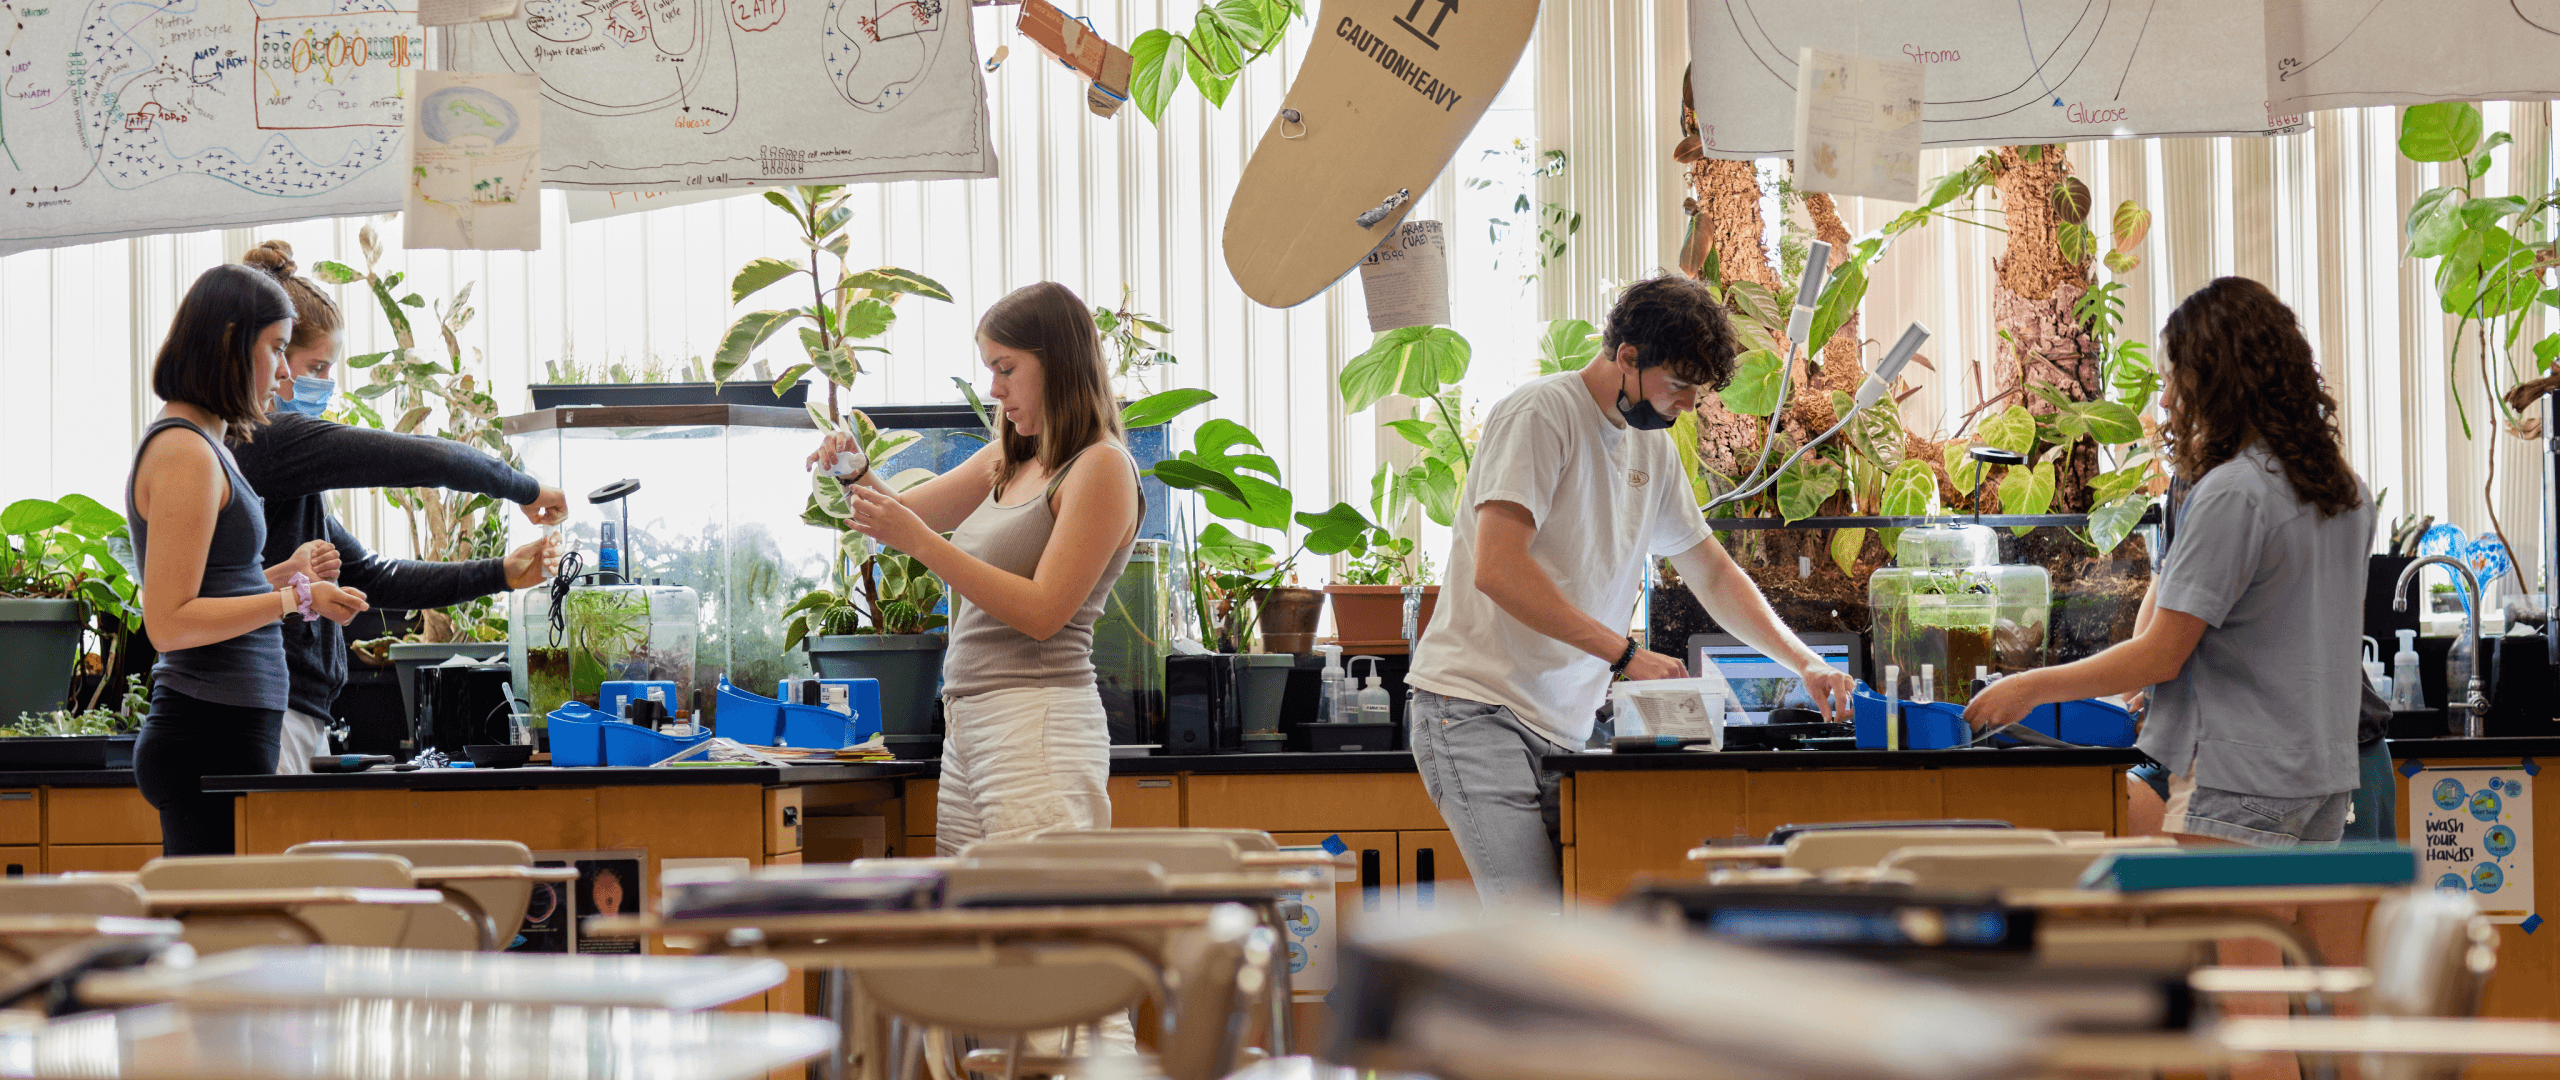 A group of students performing a lab experiement in a classroom filled with plants